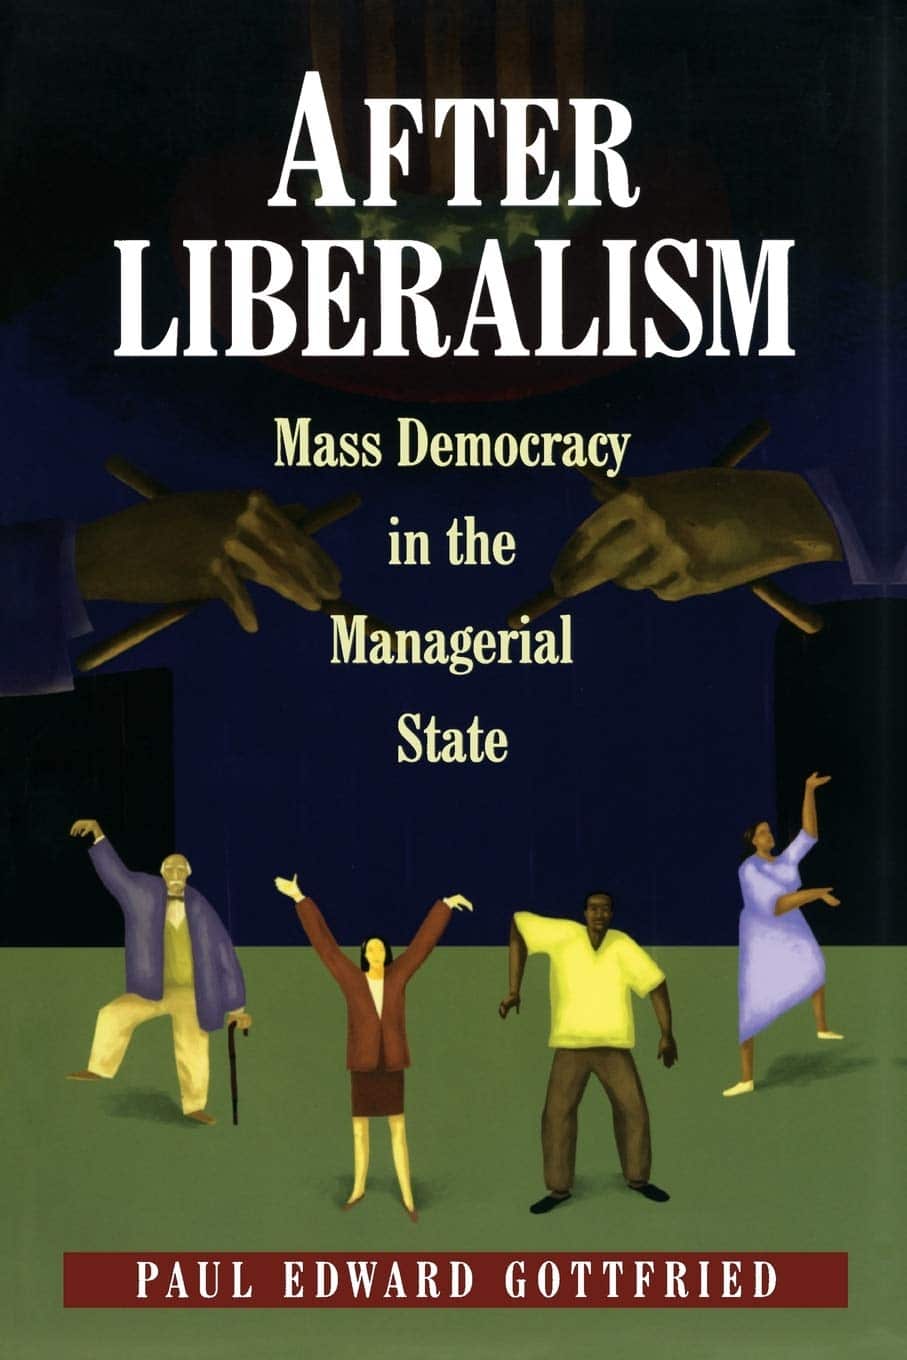 After Liberalism